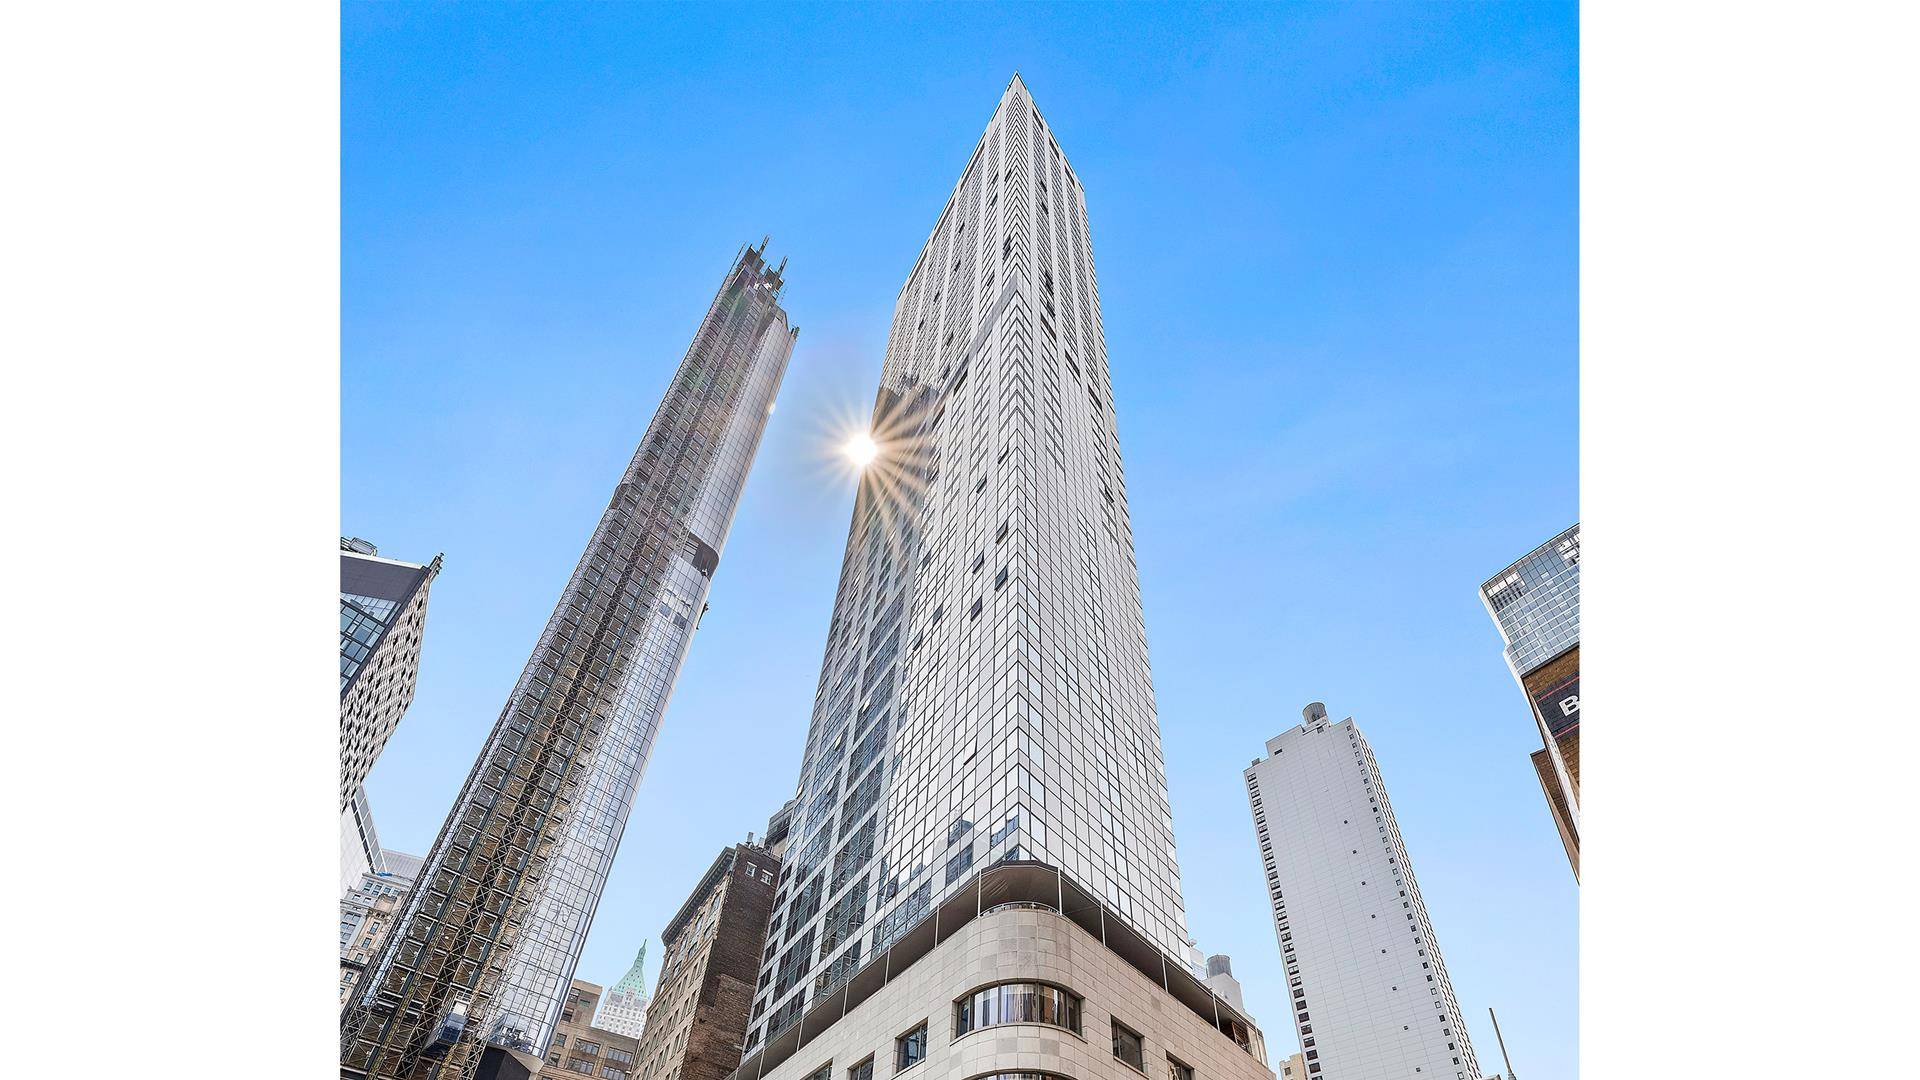 Presenting a unique investment opportunity to acquire three full floors on the 27th, 28th and 29th floors of a luxury doorman condominium building, encompassing 24 units of studio and one ...